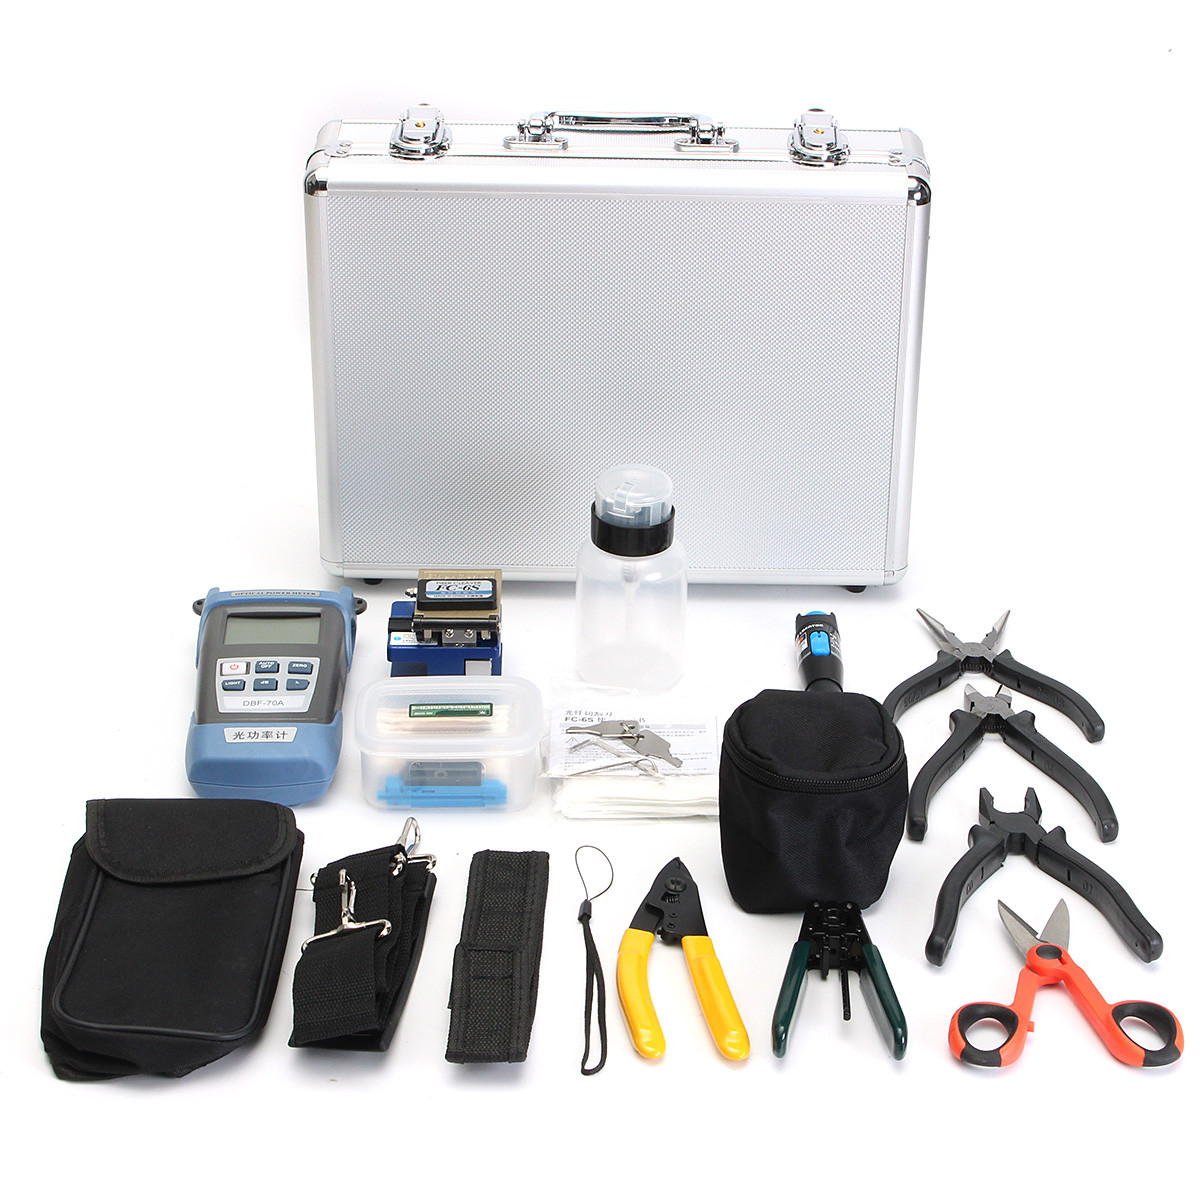 

FTTH Fiber Optic Cable Tester Tool Kit with Fiber Cleaver/Power Meter/Stripper/Fault Locator